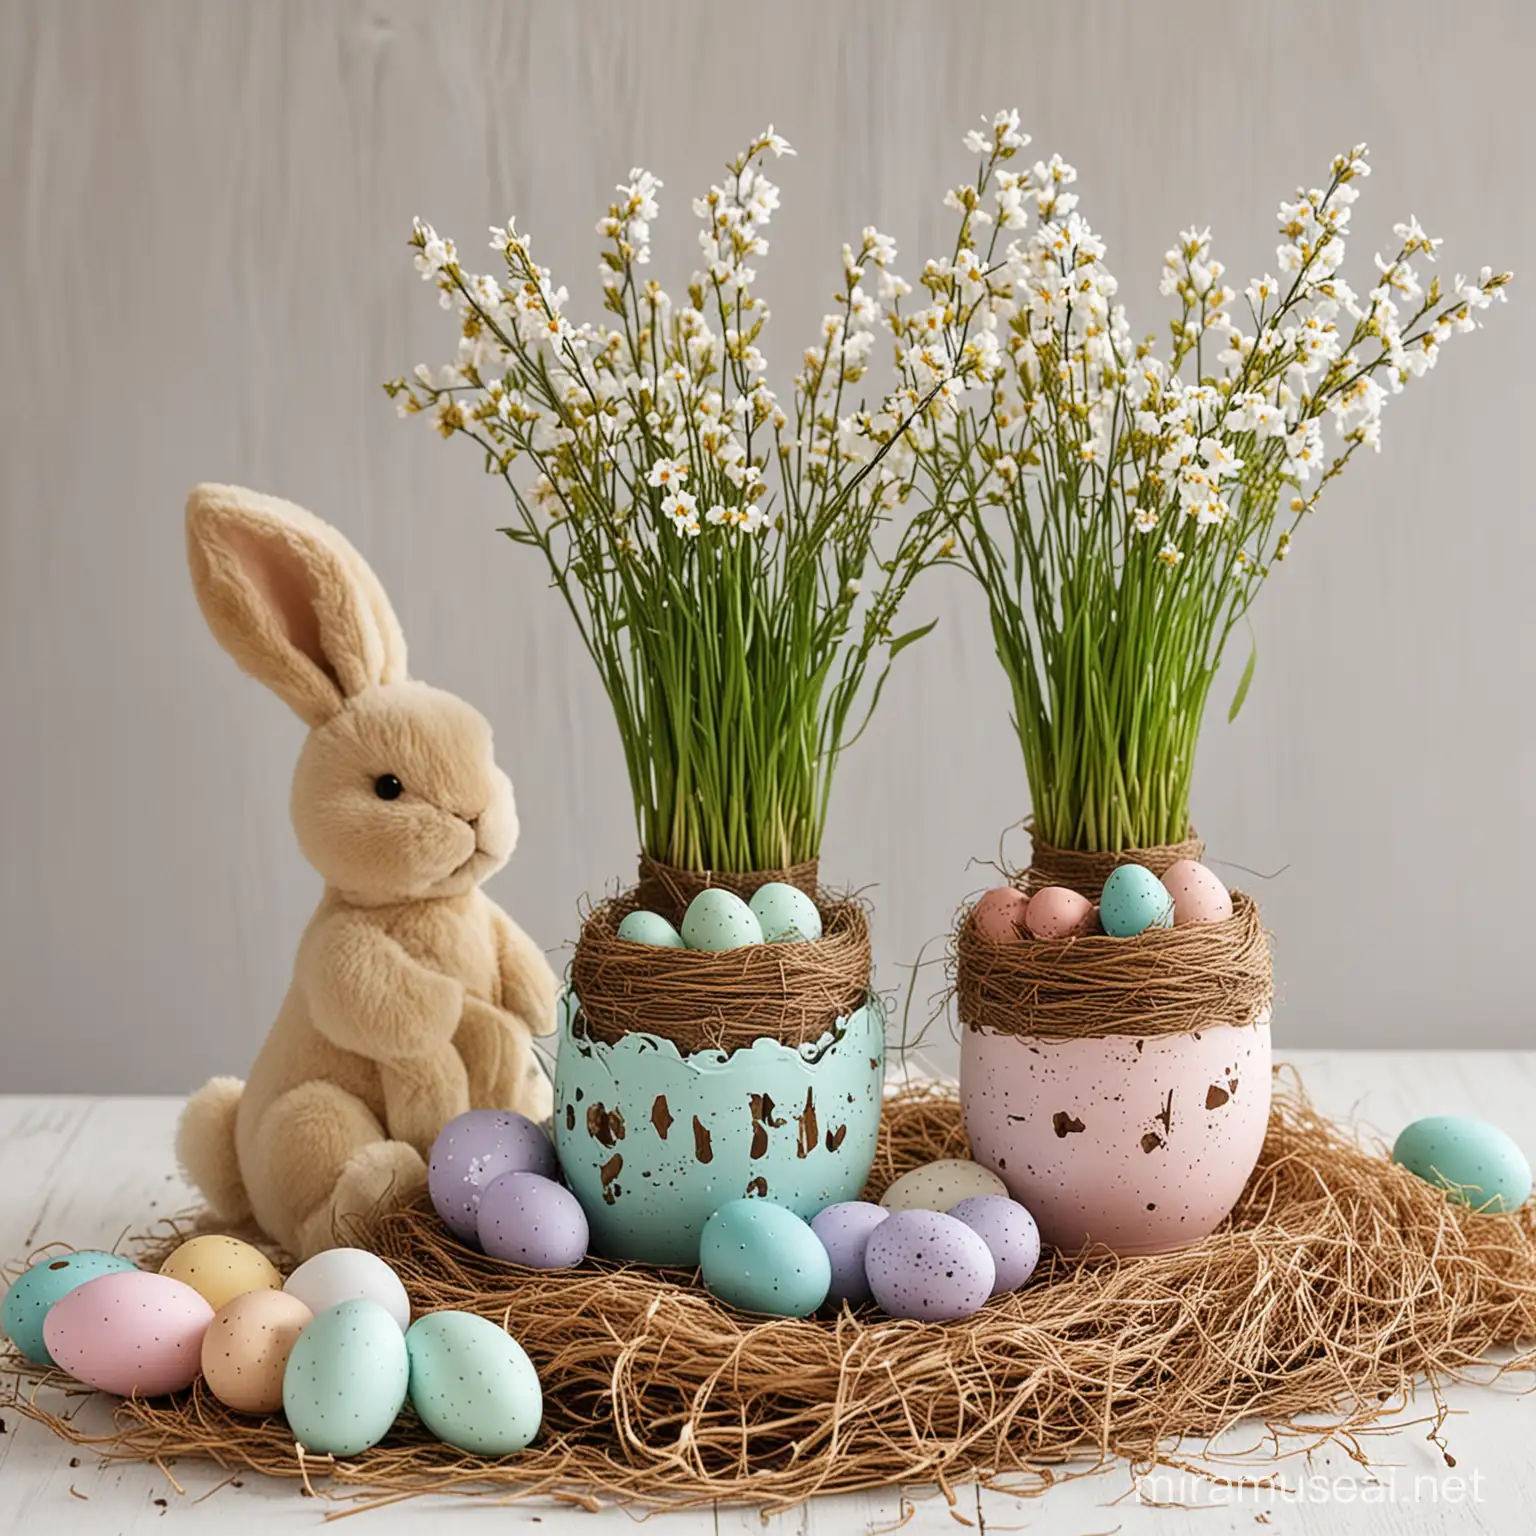 EasterThemed Room Decor Ideas Vibrant Spring Colors and Cheerful Bunny Accents